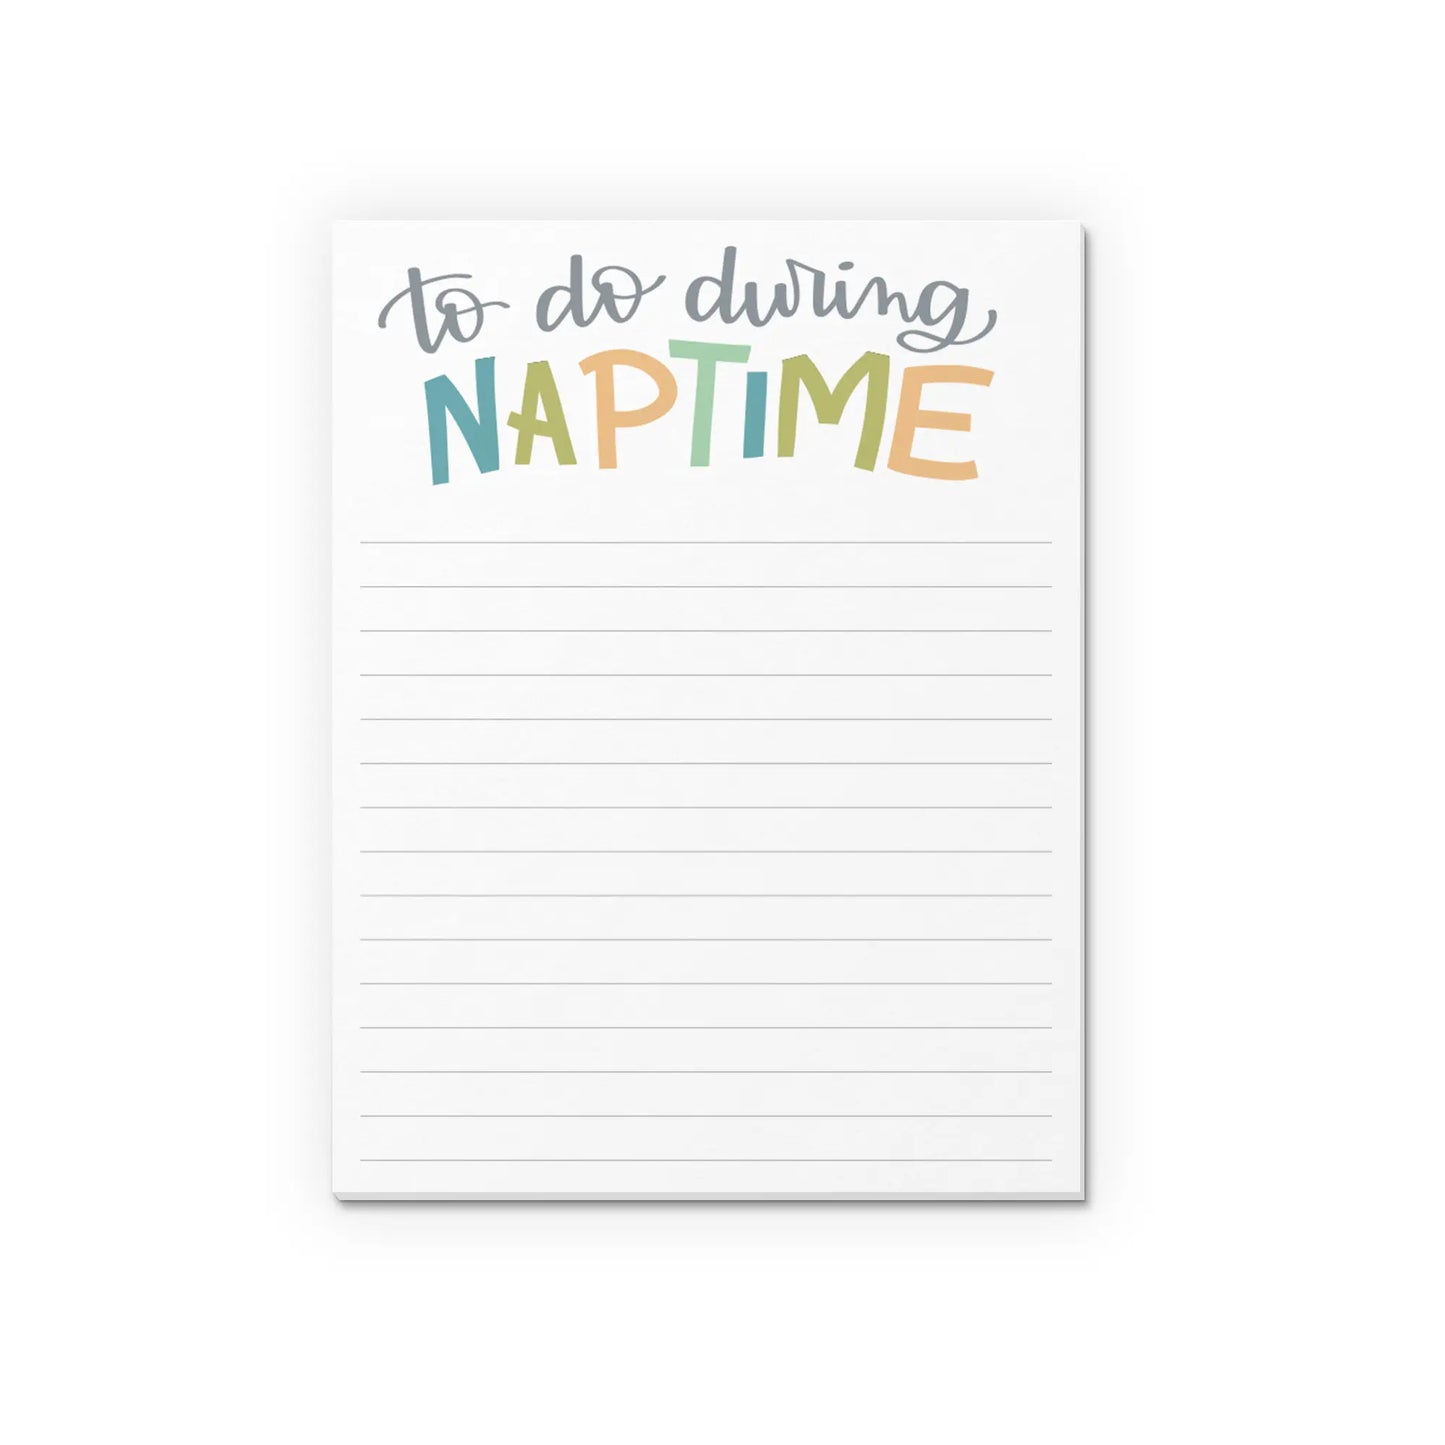 Nap time Notepad To-Do List